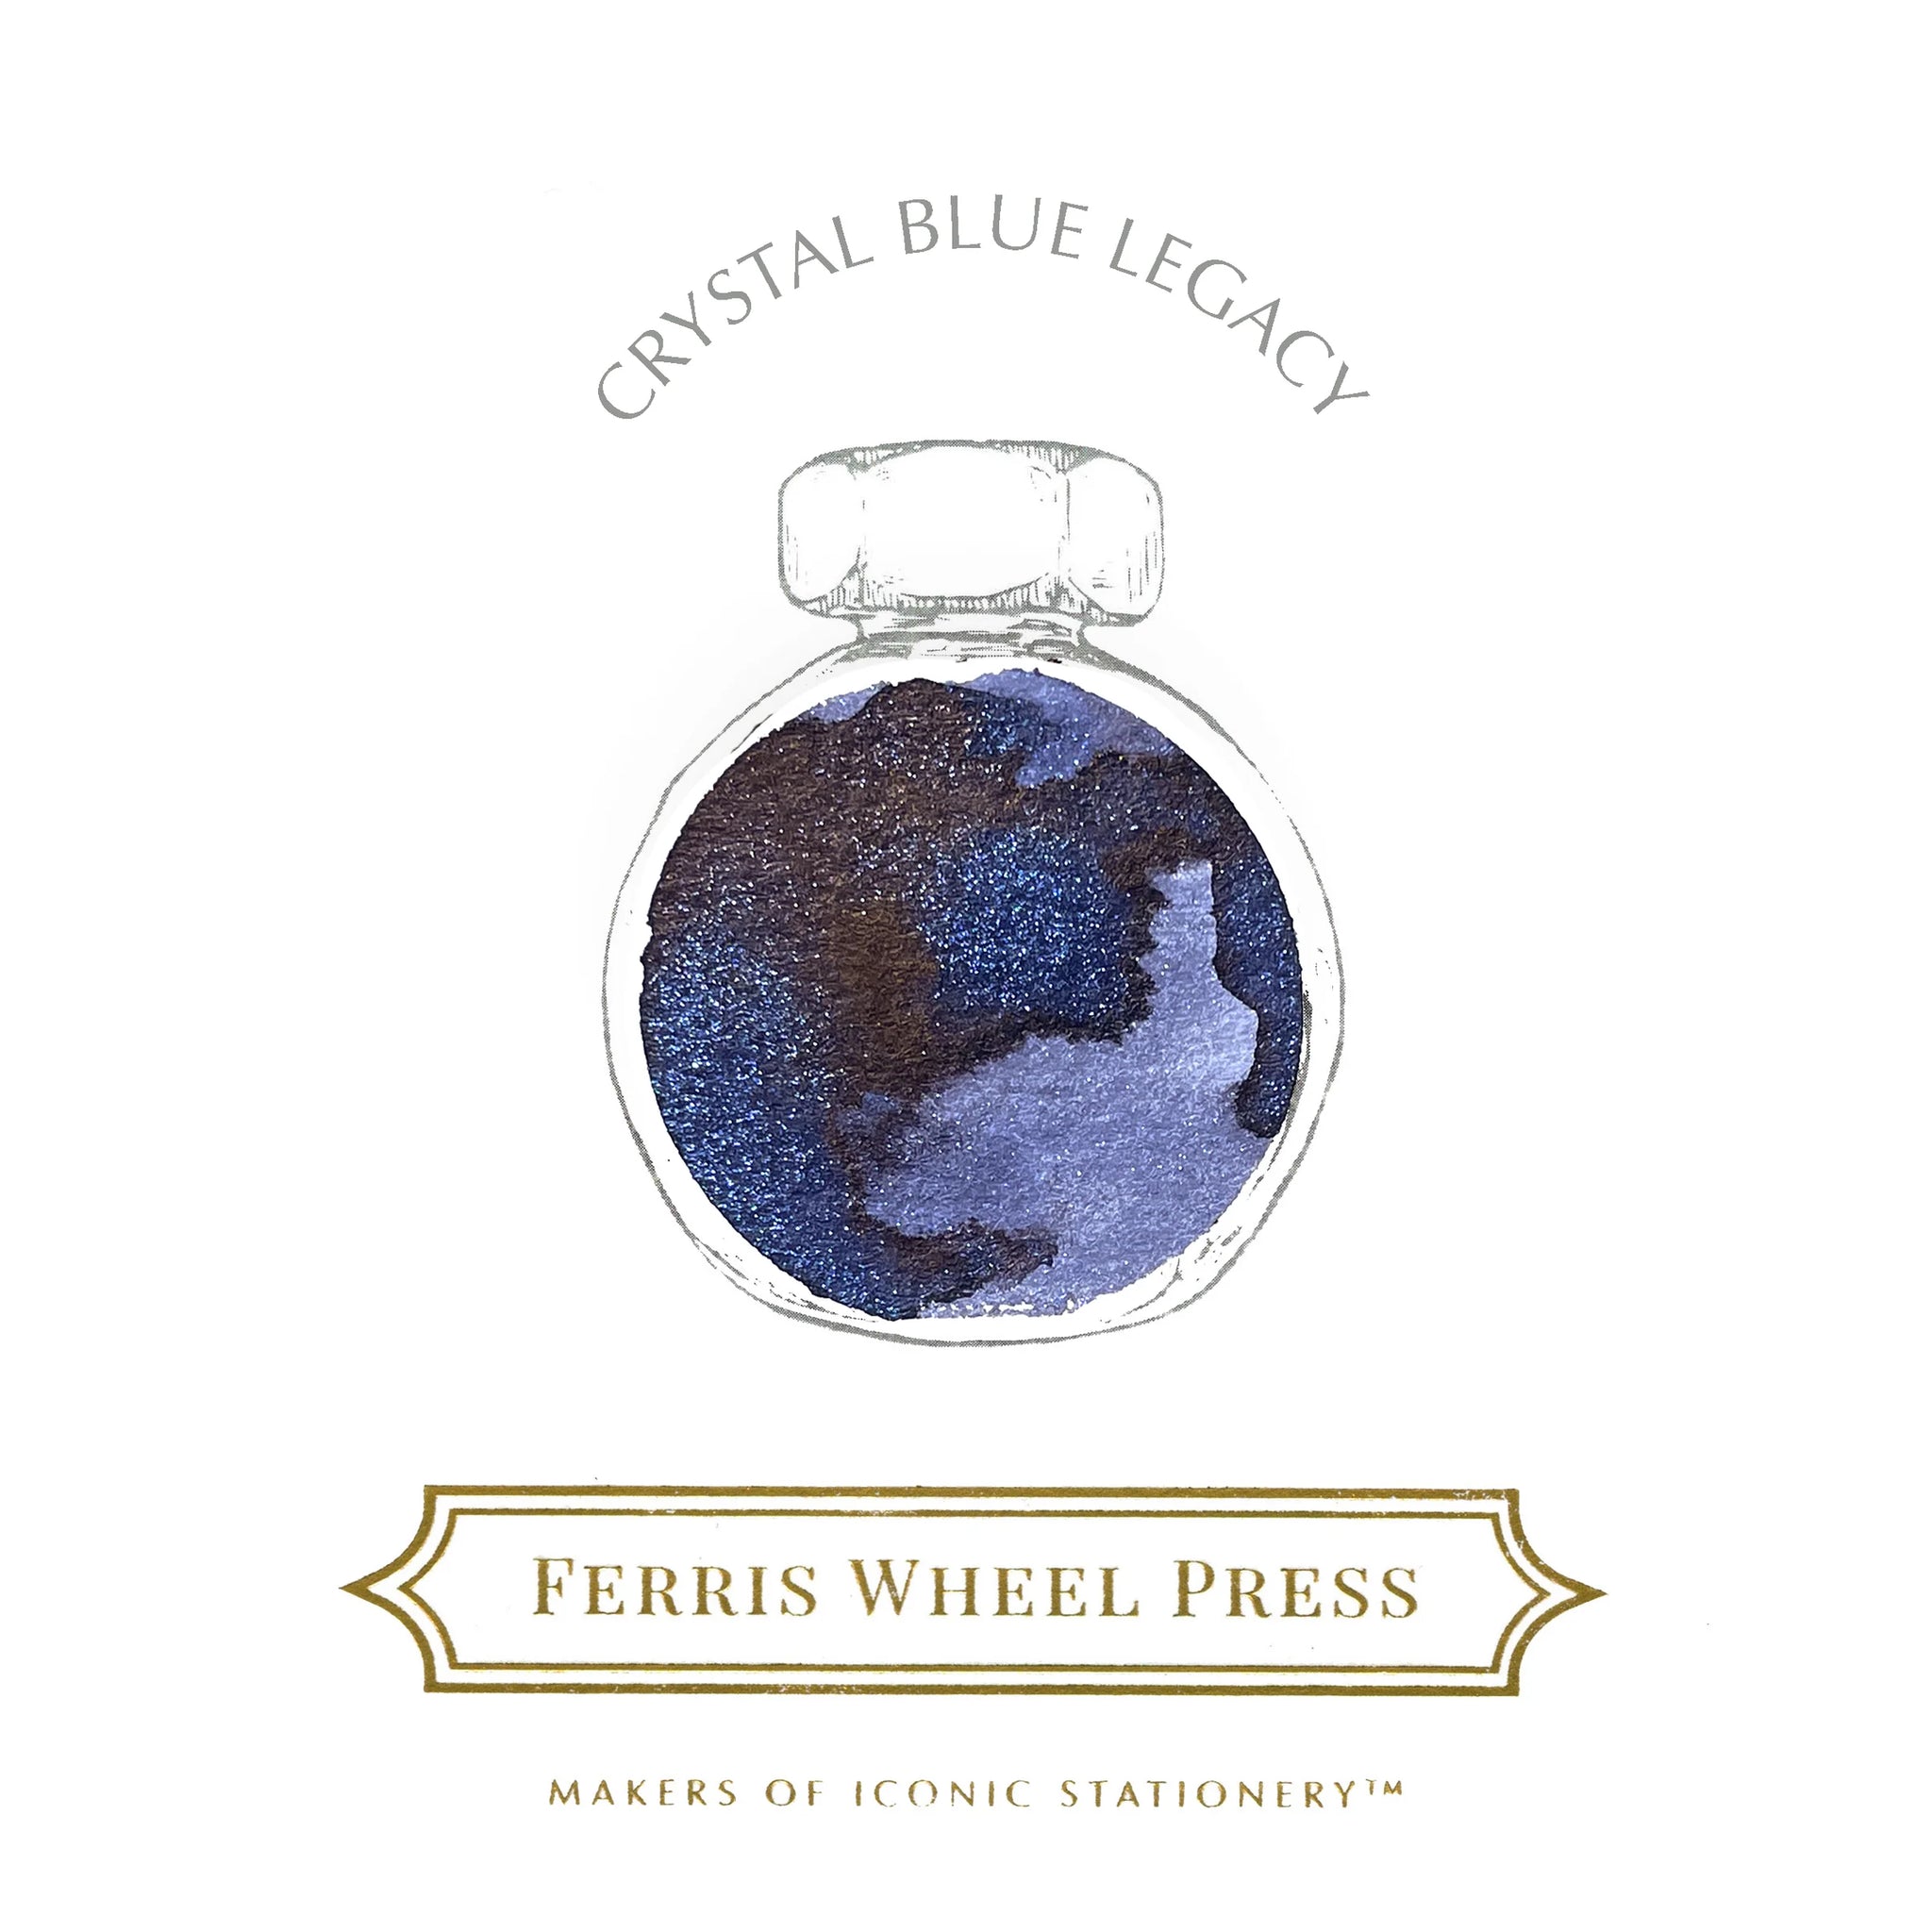 Ferris Wheel Press | Ink Charger Set | Frosted Carnival Collection